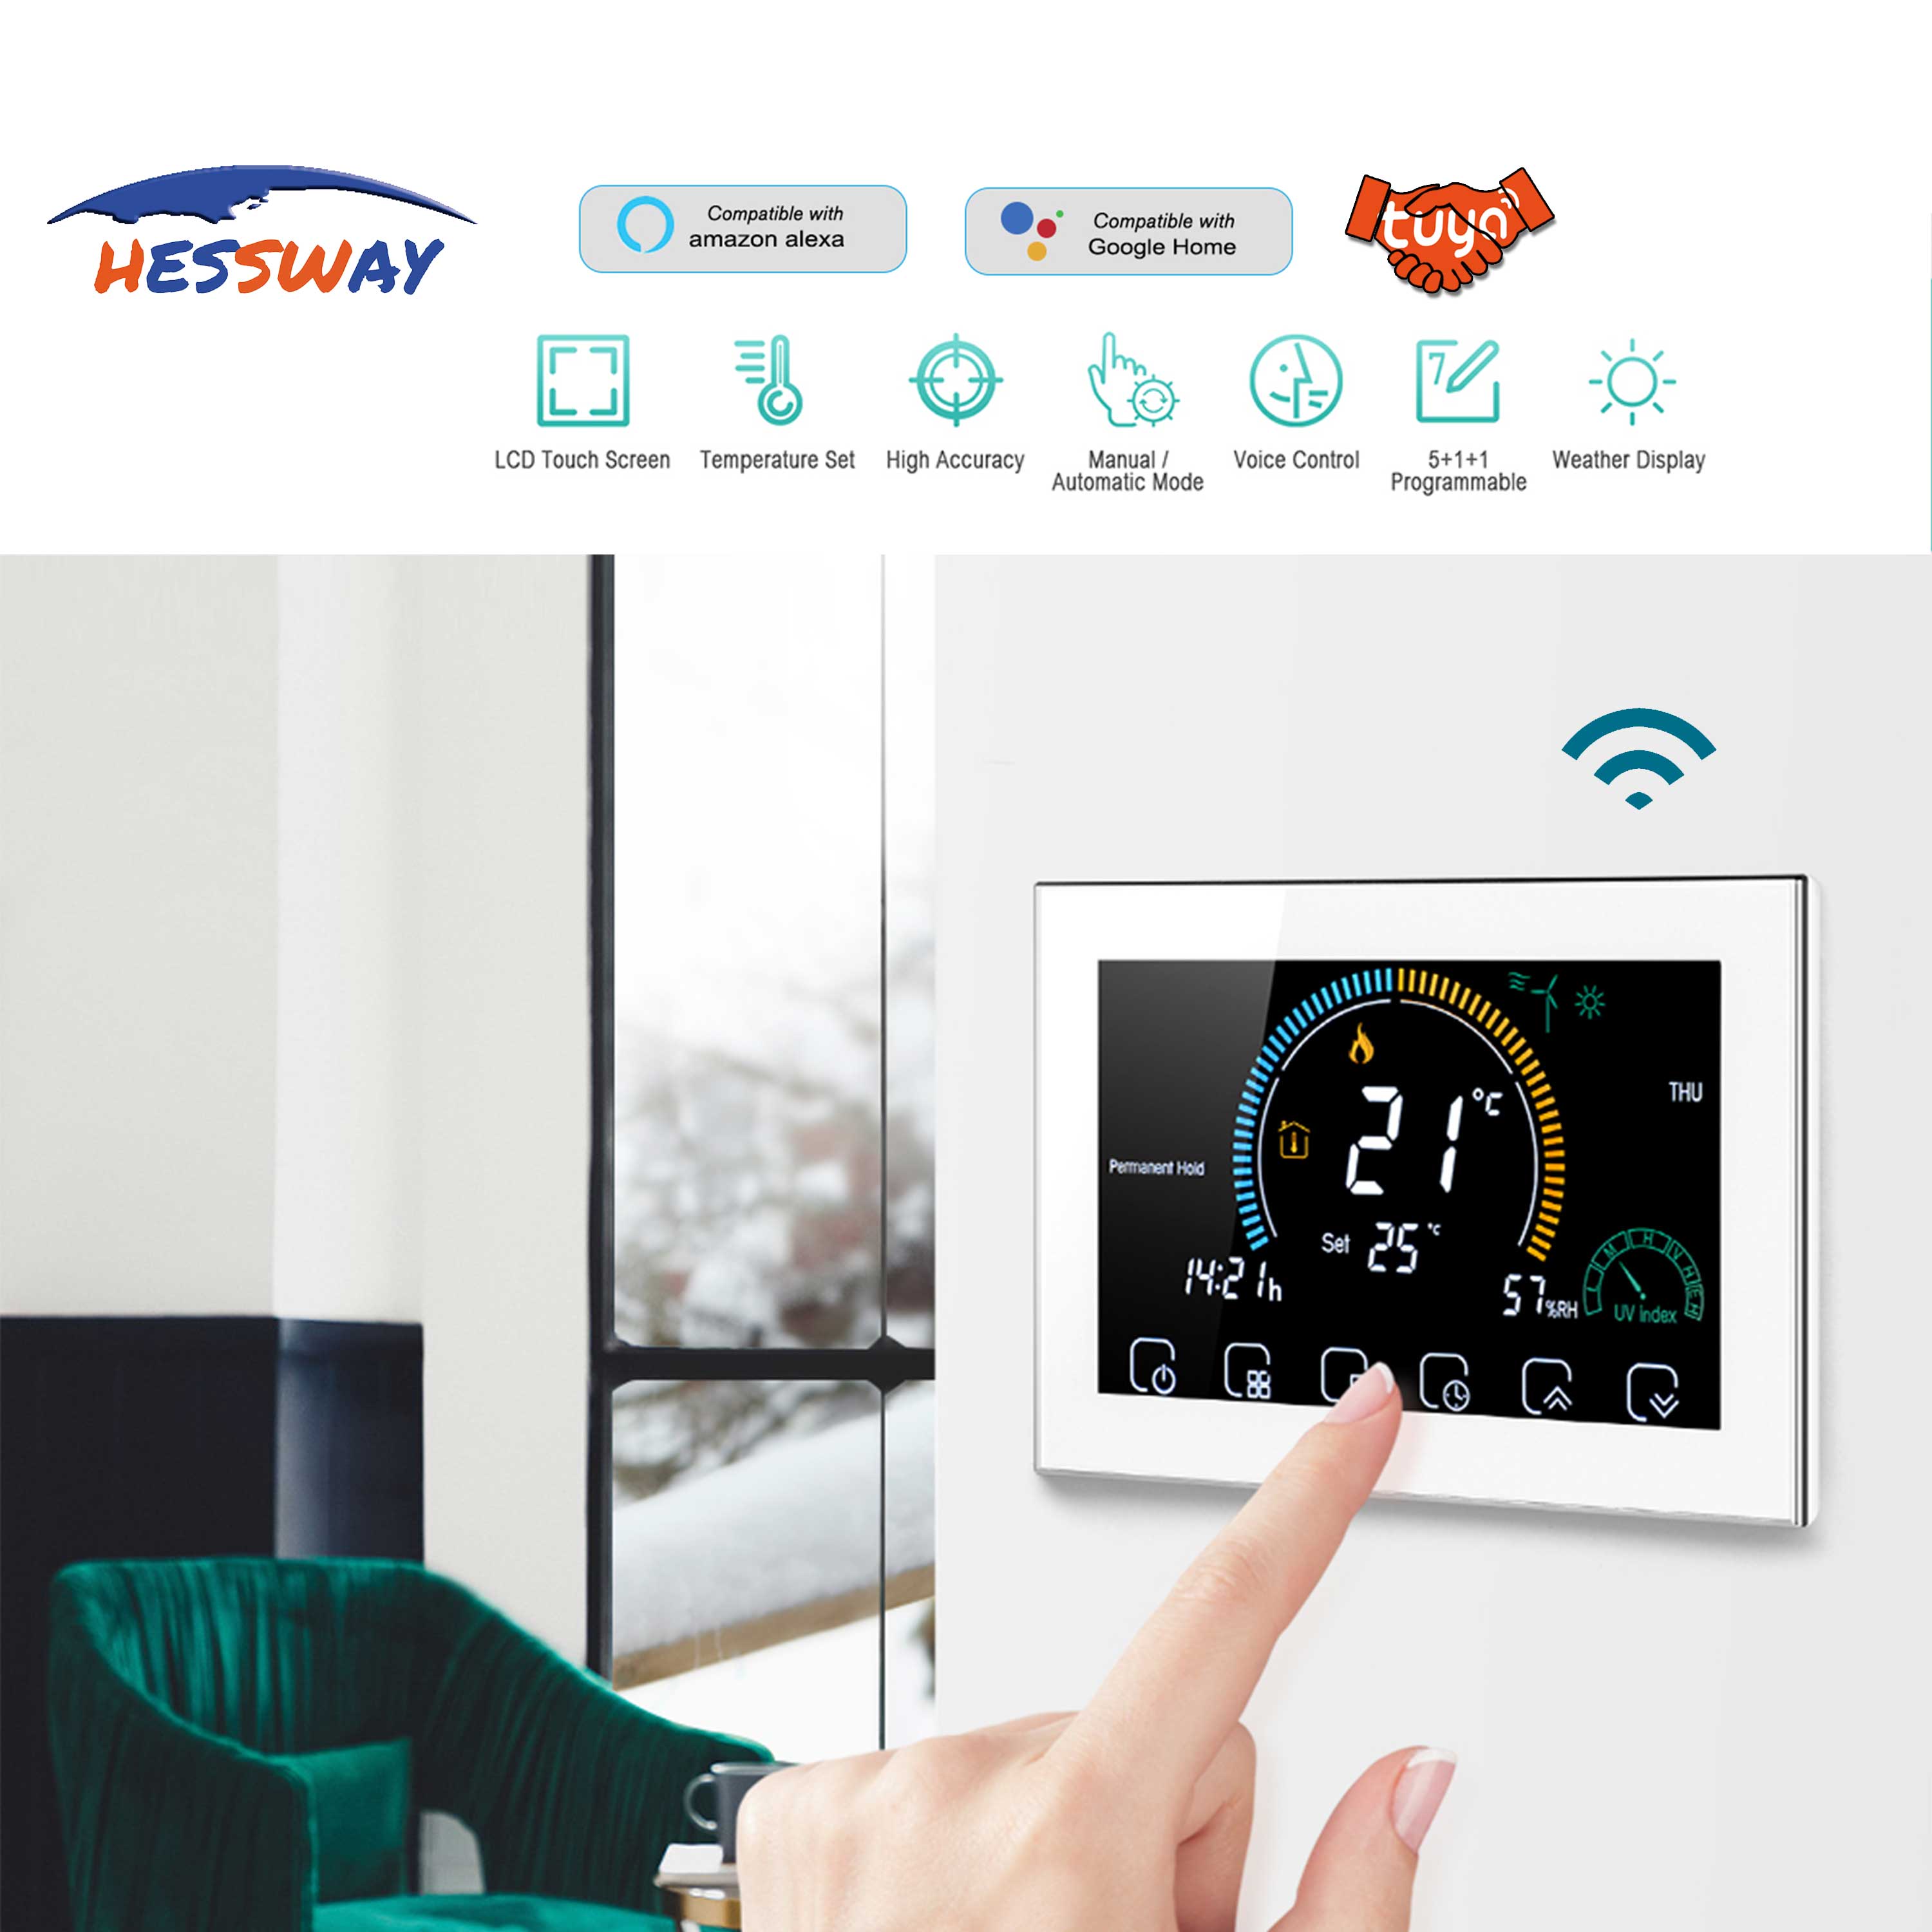 WIFI TUYA Dual Sensor Thermostat Boiler Floor Heating System 5A/Electric Heating 16A Monitor Weather, UV Index, Humidity Display